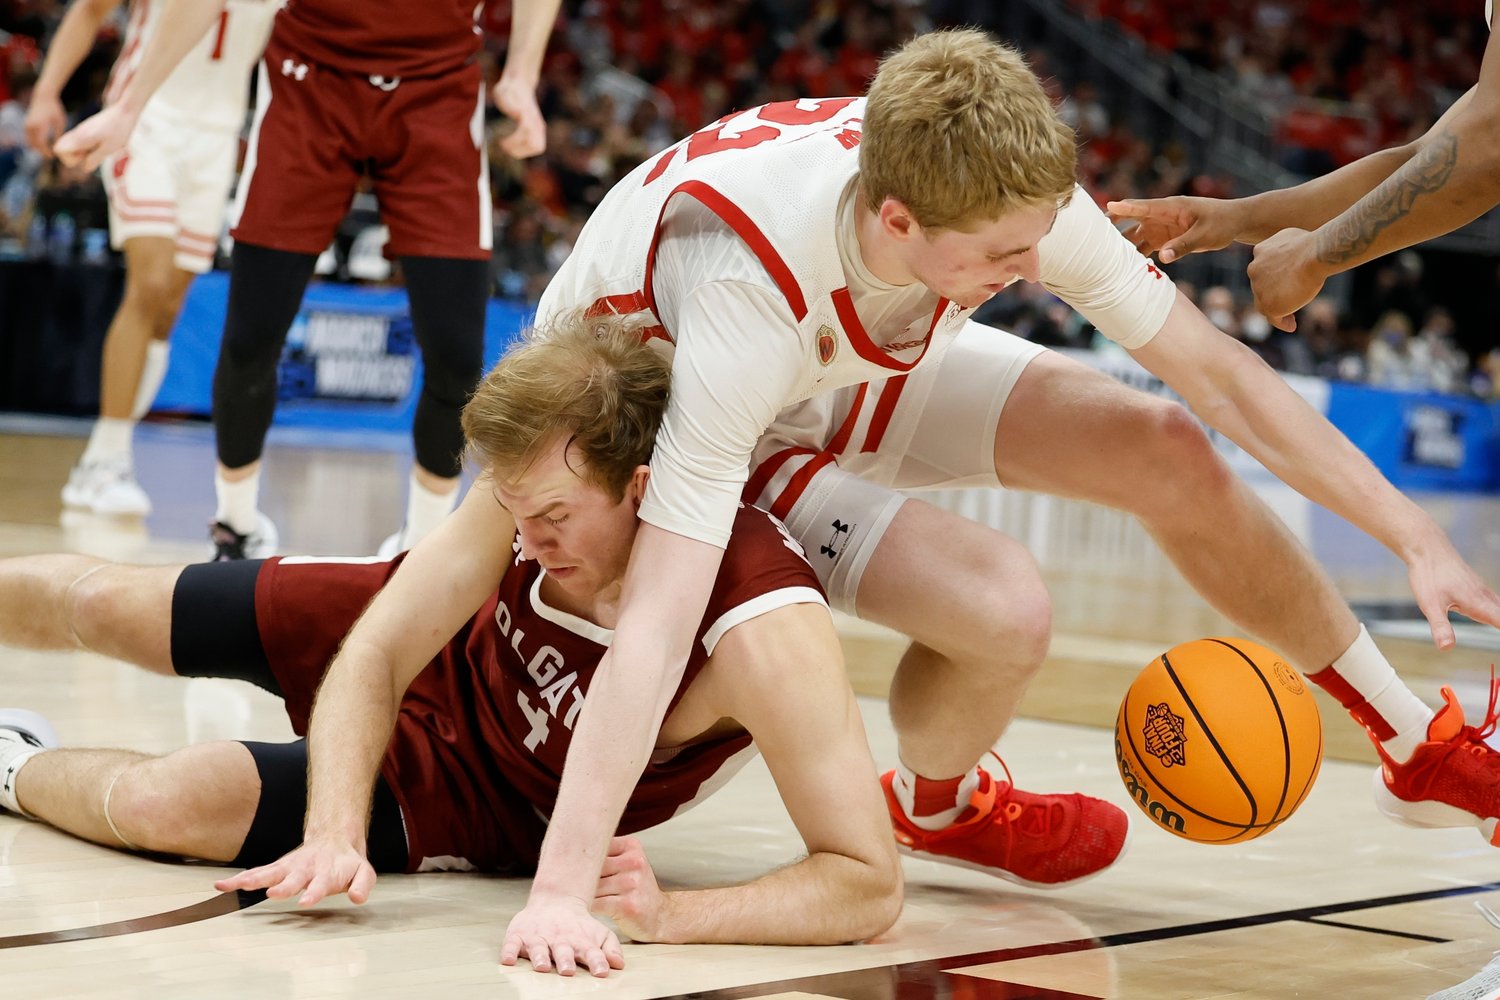 LOOSE BALL — Colgate's Ryan Moffatt and Wisconsin's Steven Crowl battle for a loose ball during the first half of a first-round NCAA men's basketball tournament game on Friday night in Milwaukee.